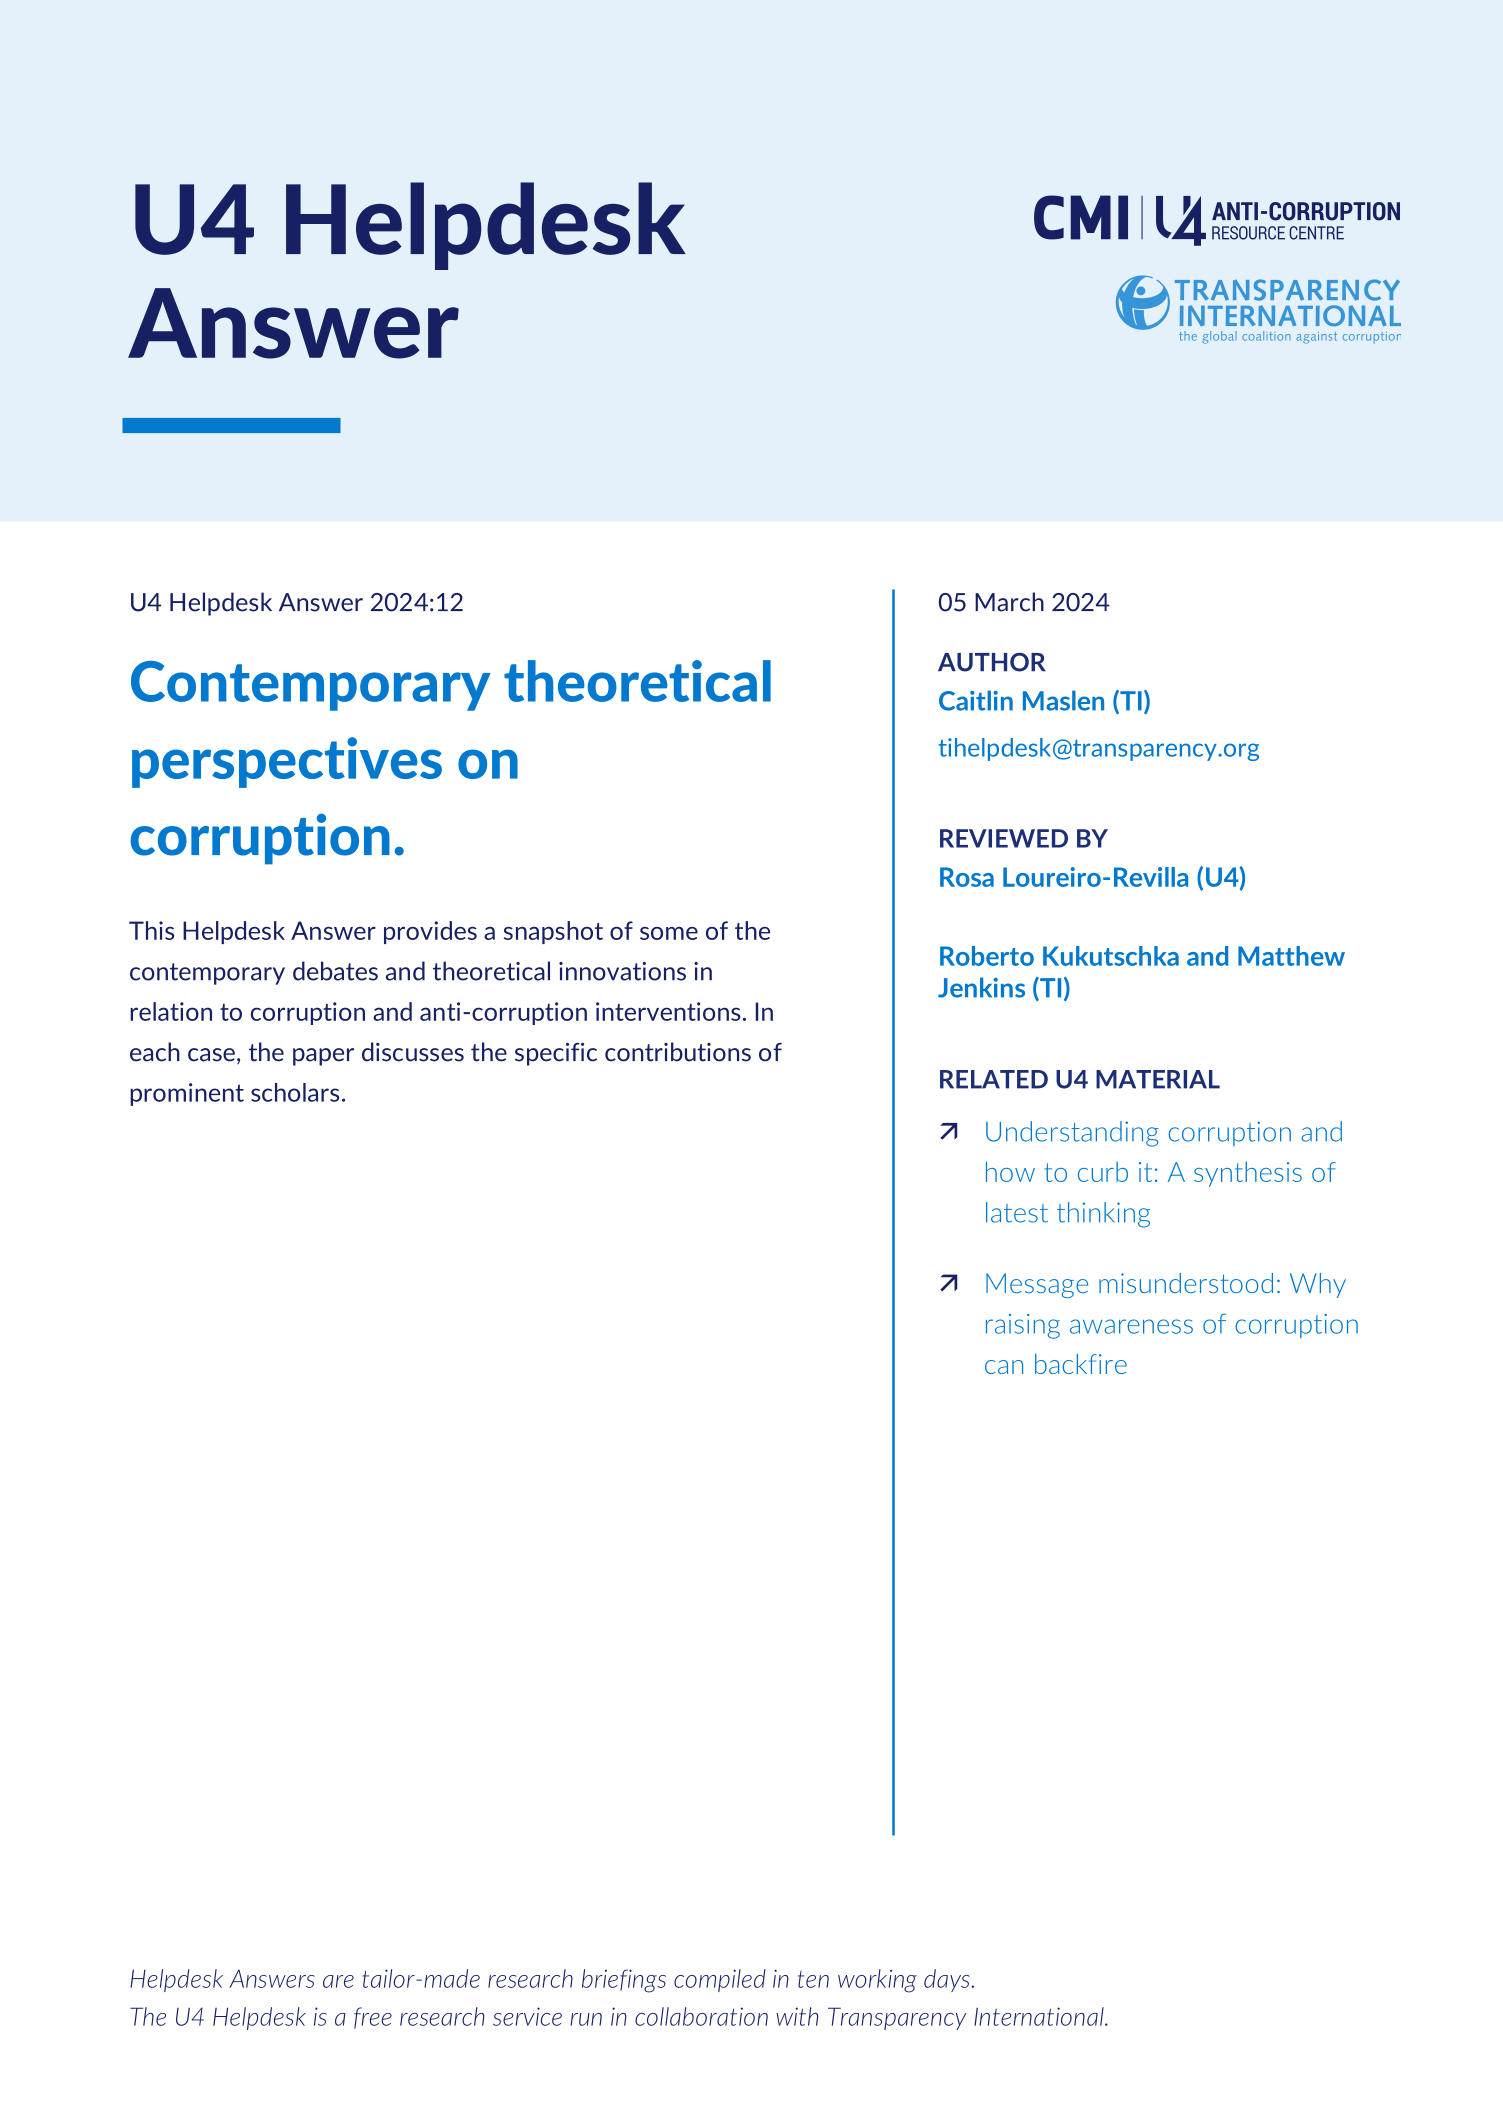 Contemporary theoretical perspectives on corruption